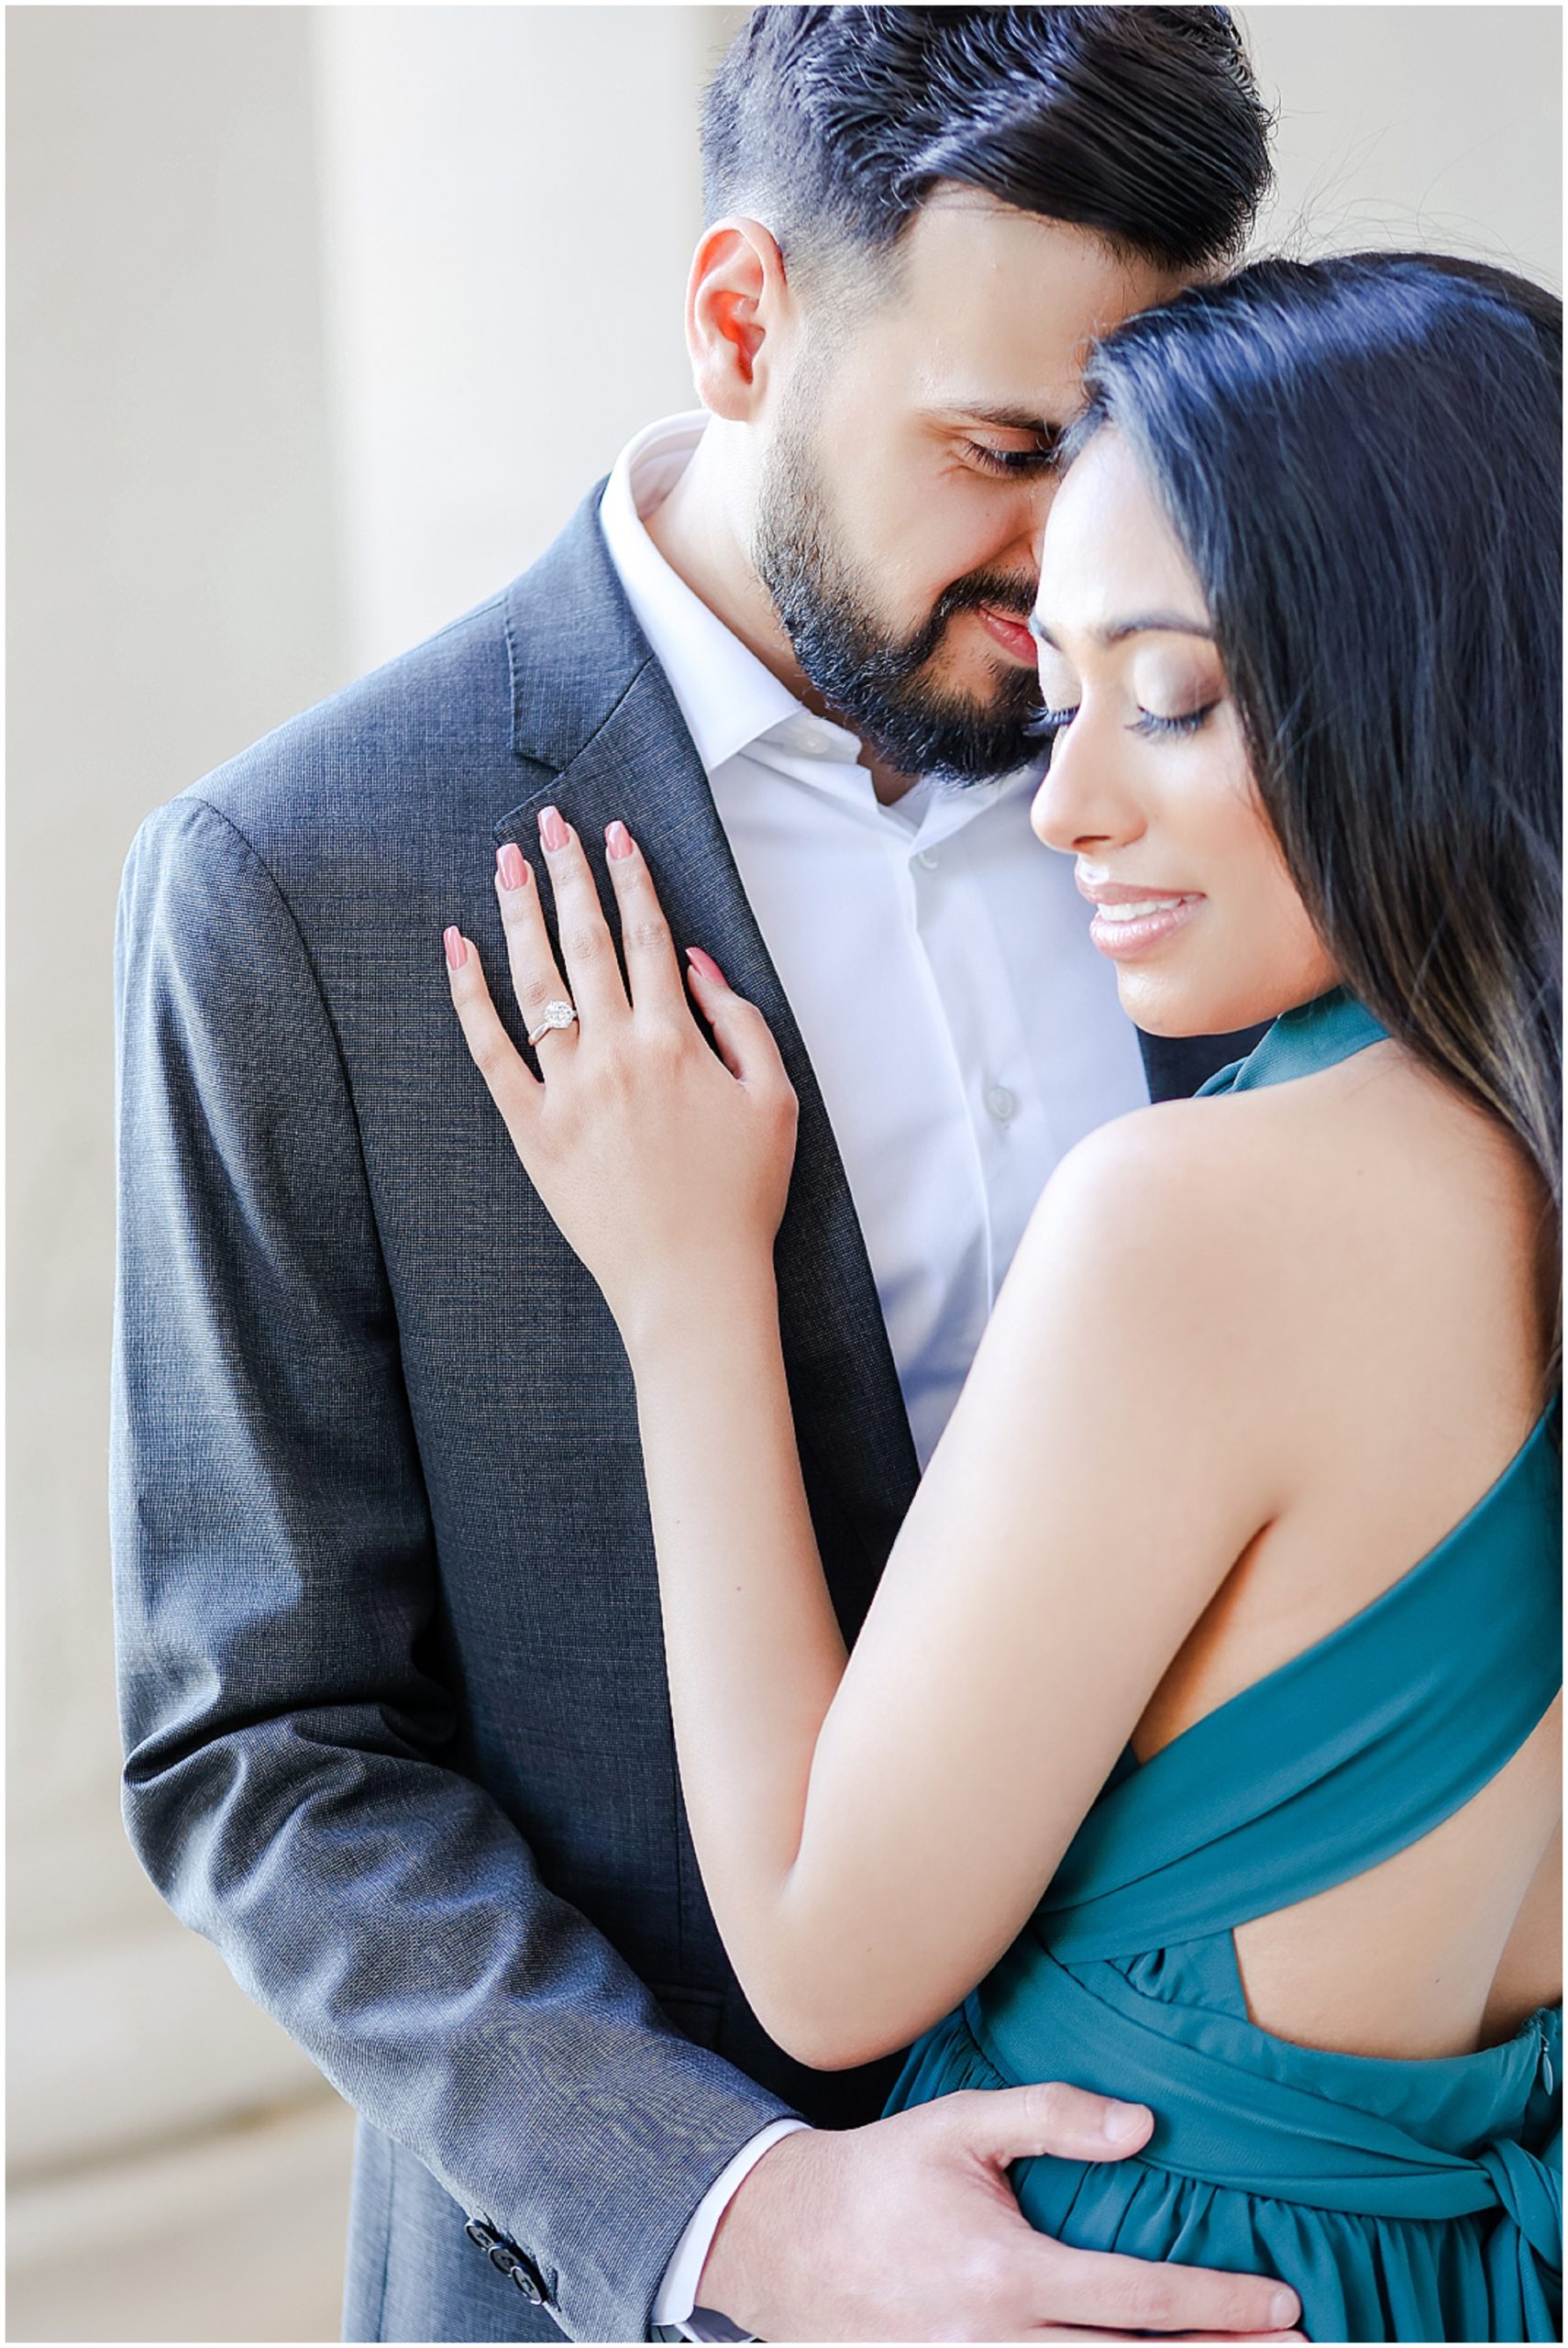 Fusion Indian Engagement Photos at Kansas City Nelson Atkins Museum for Bryant & Kaman - Mariam Saifan Photography - Where to take Engagement Photos - What to Wear to Engagement Session - Style Guide - Best Indian Wedding Photography Kansas City and STL